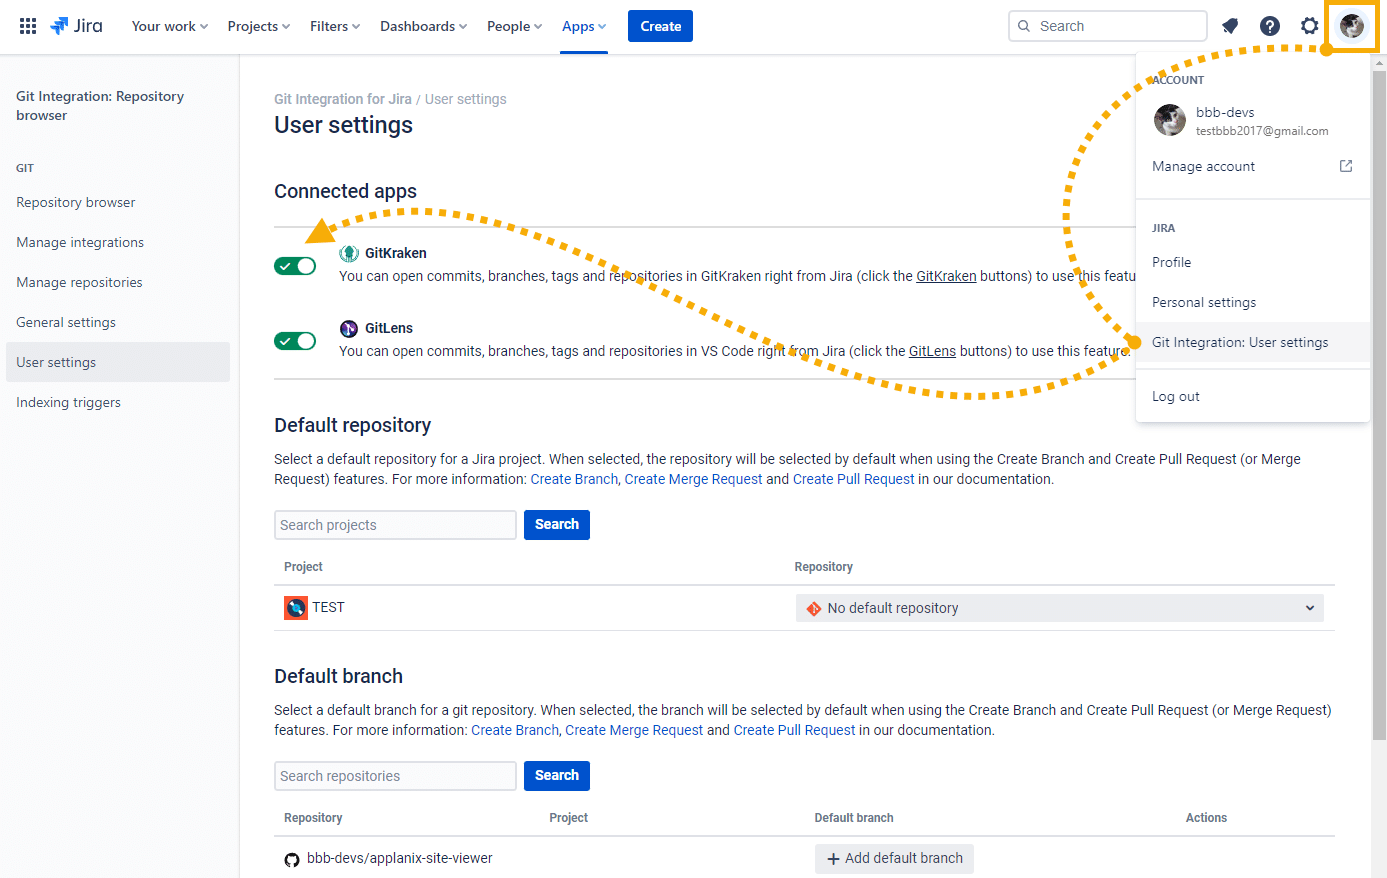 Access the GitKraken integration option to enable/disable the feature in the User settings (sidebar) of the Git Integration for Jira app